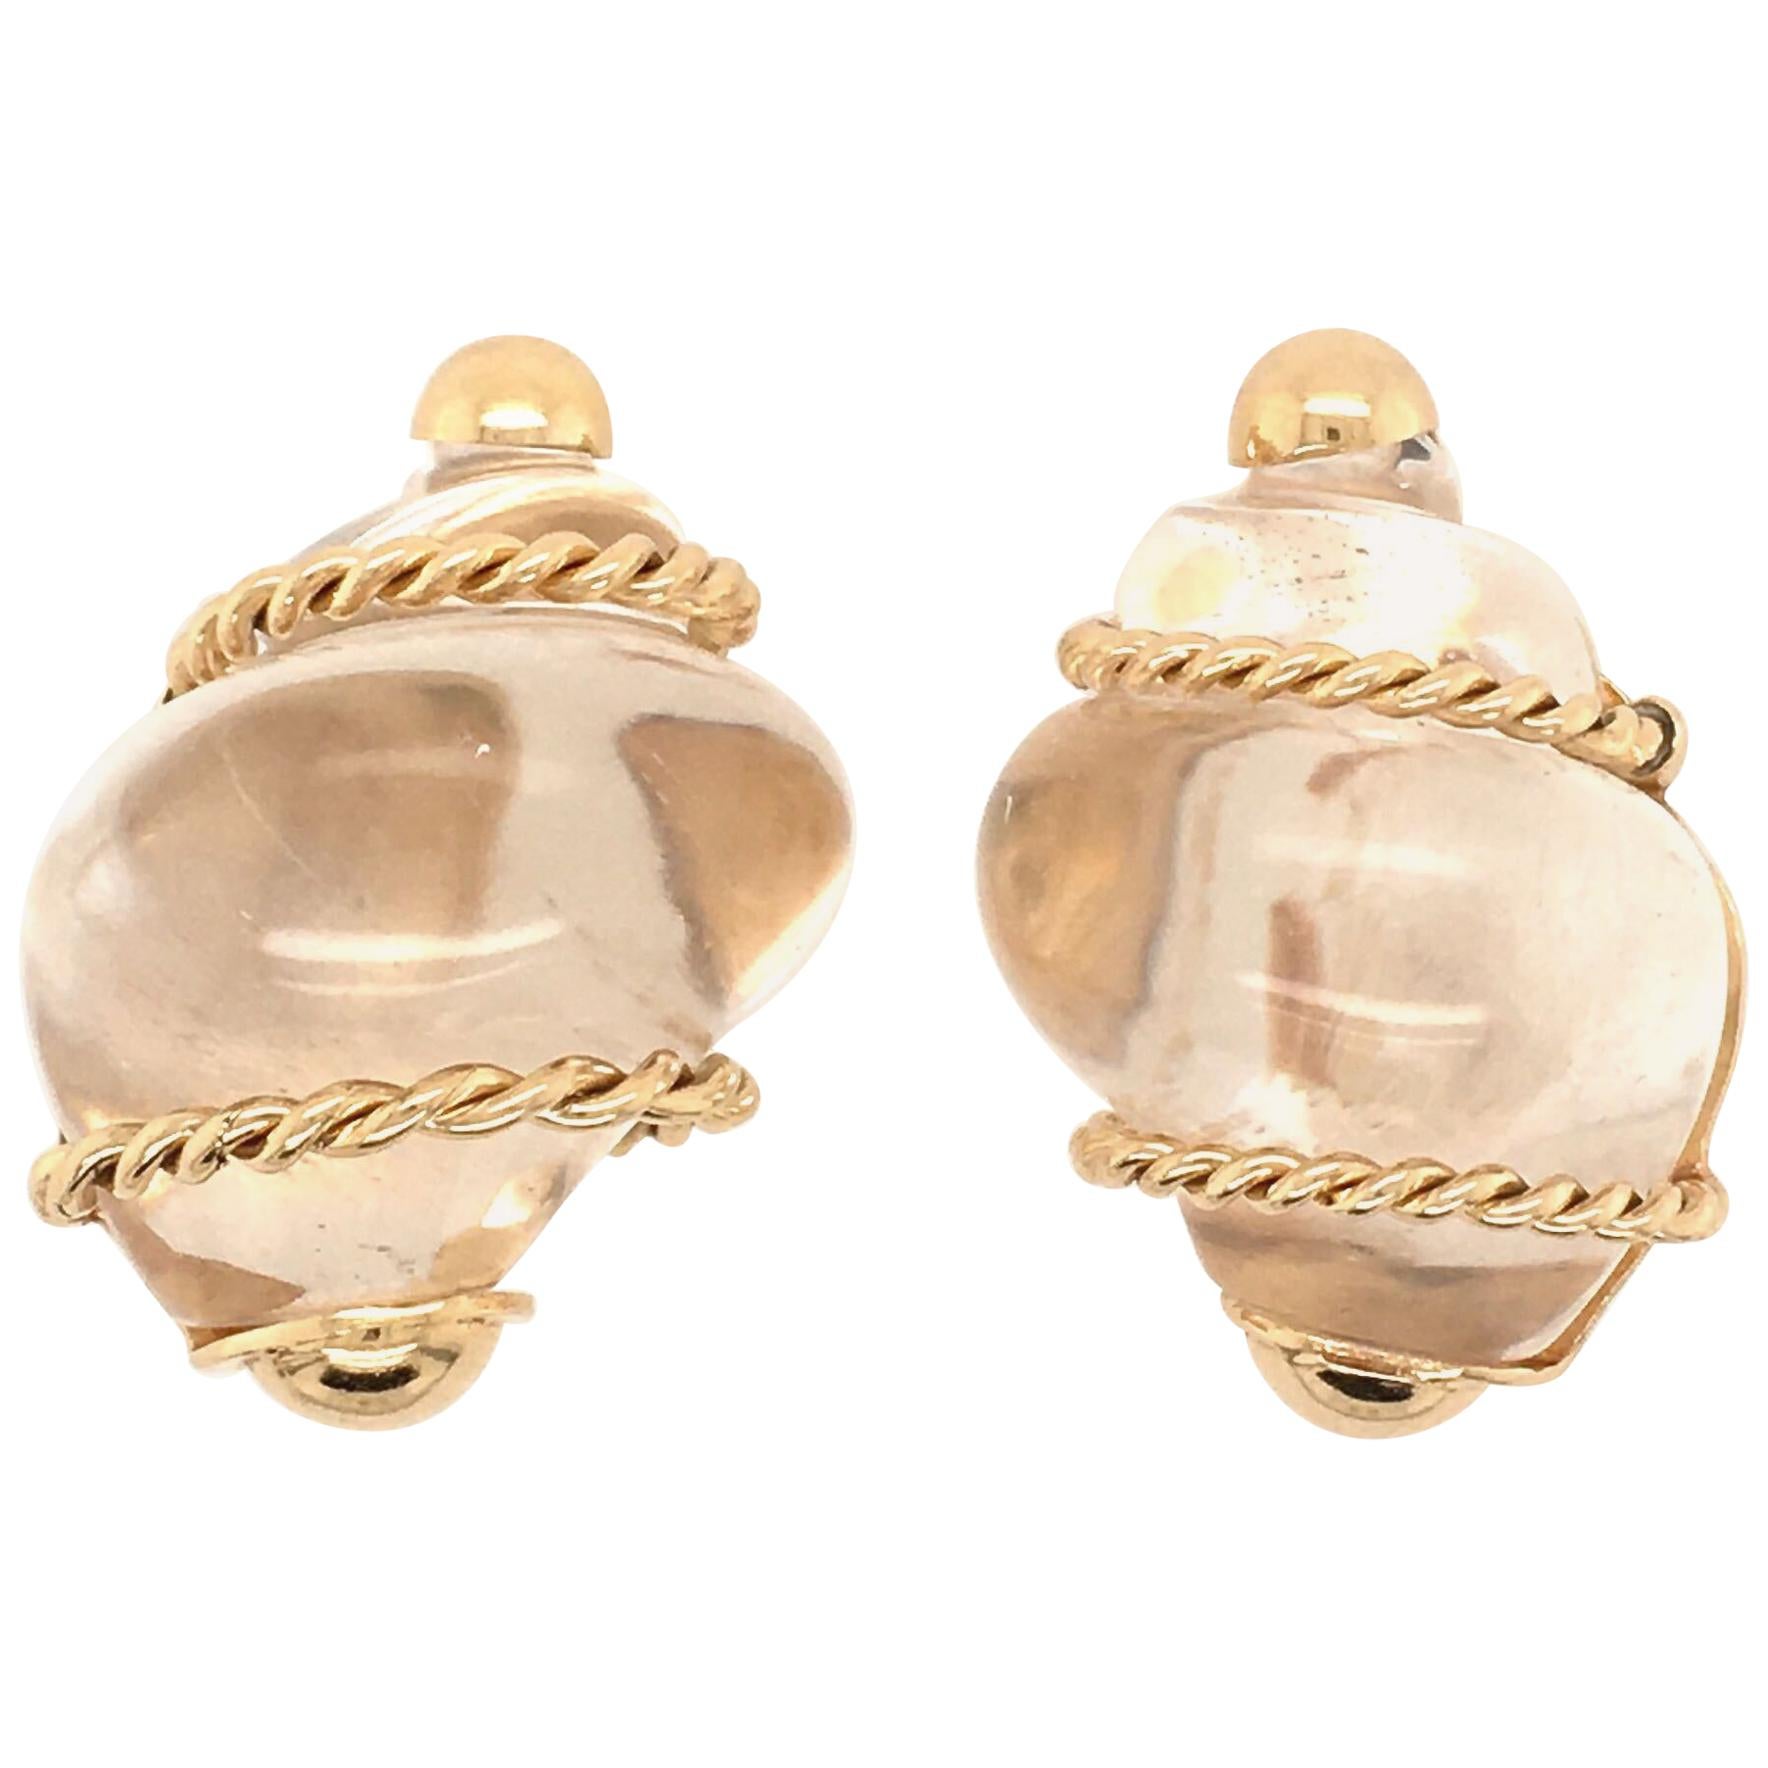 Patricia Schepps Vaill for Seaman Schepps Rock Crystal and Gold Shell Earrings